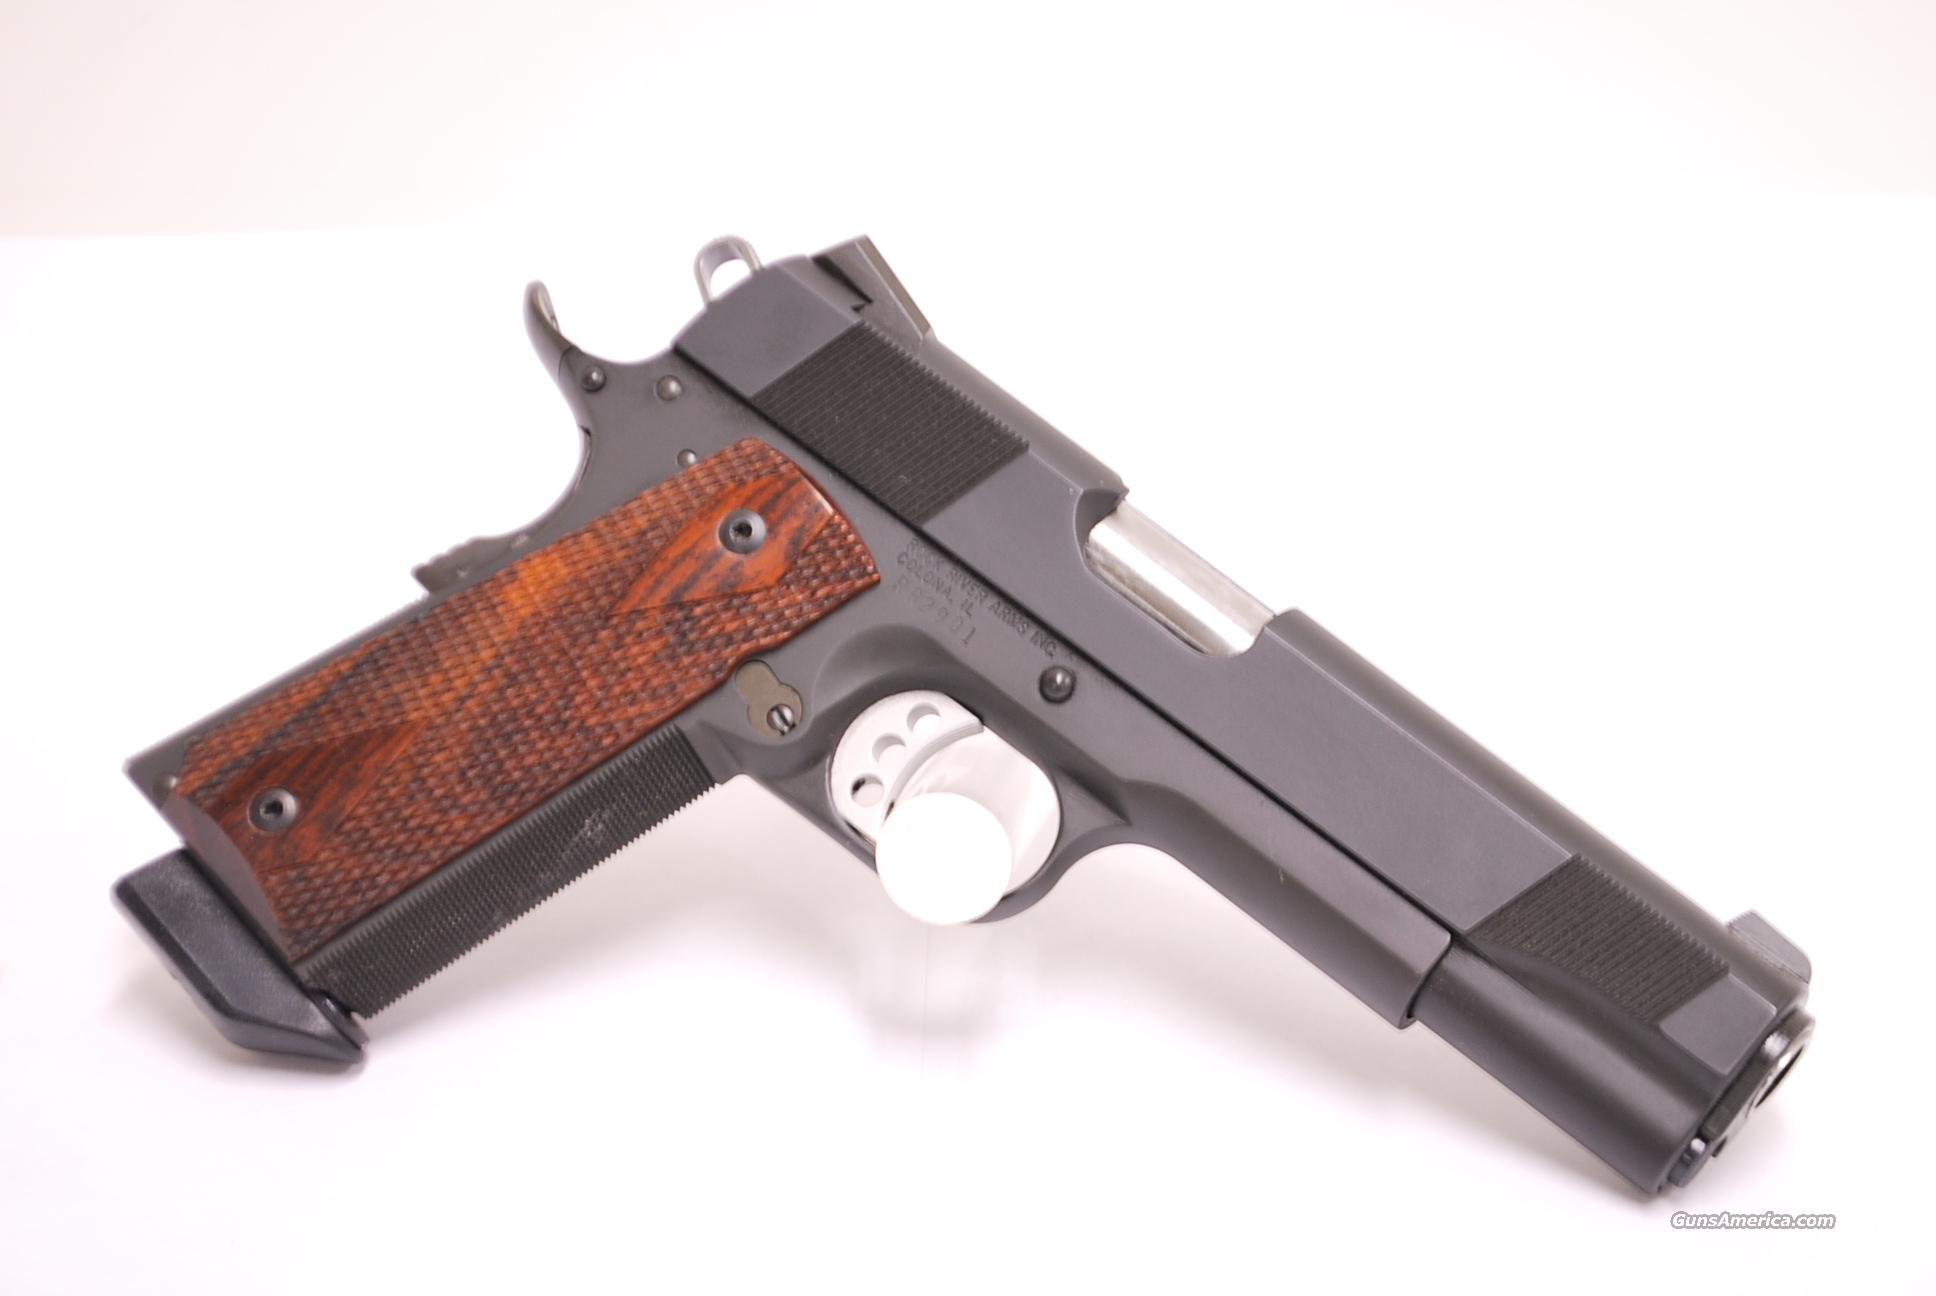 Rock River Arms 1911 A 1 45 5 In For Sale At 995614728 8665